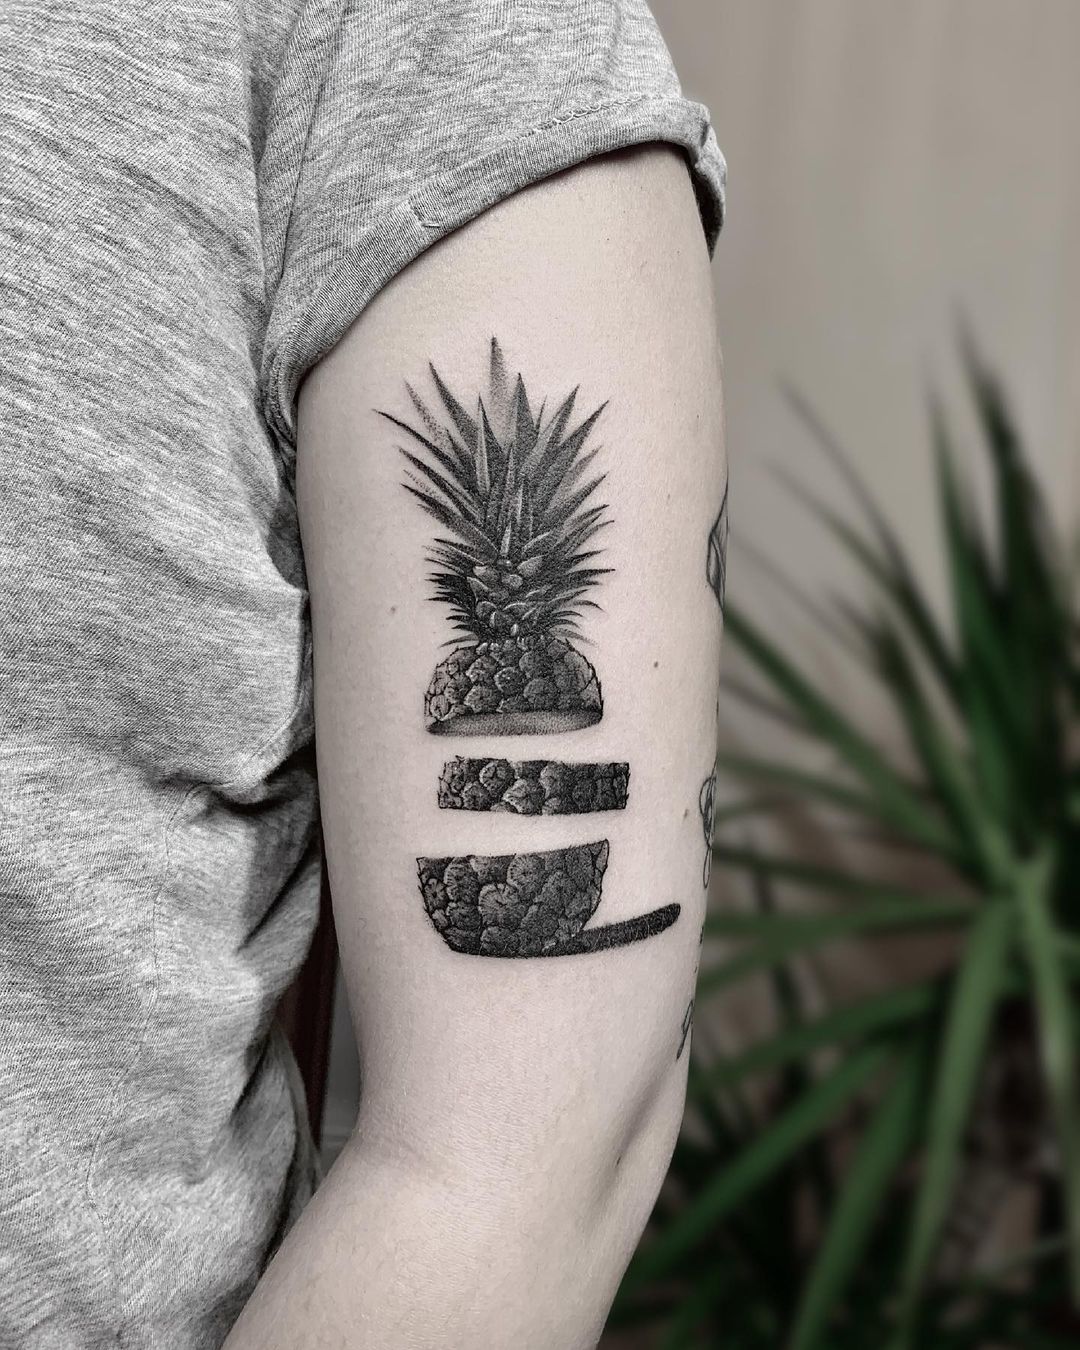 pineapple tattoo in the arm